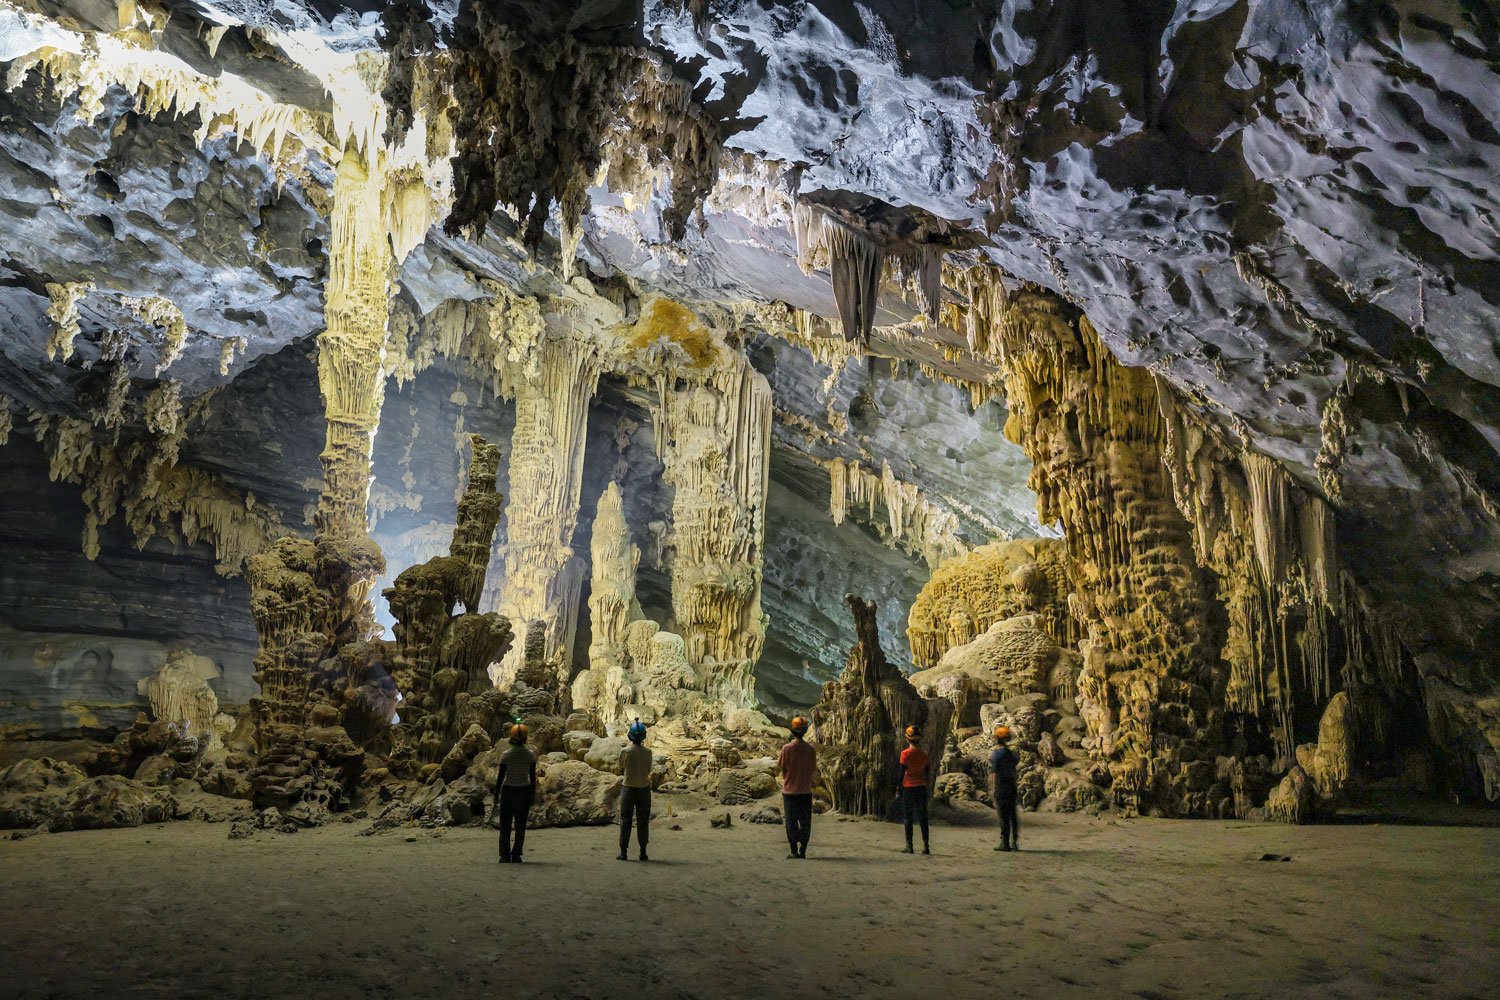 Impressive cave formations in Tu Lan Cave.